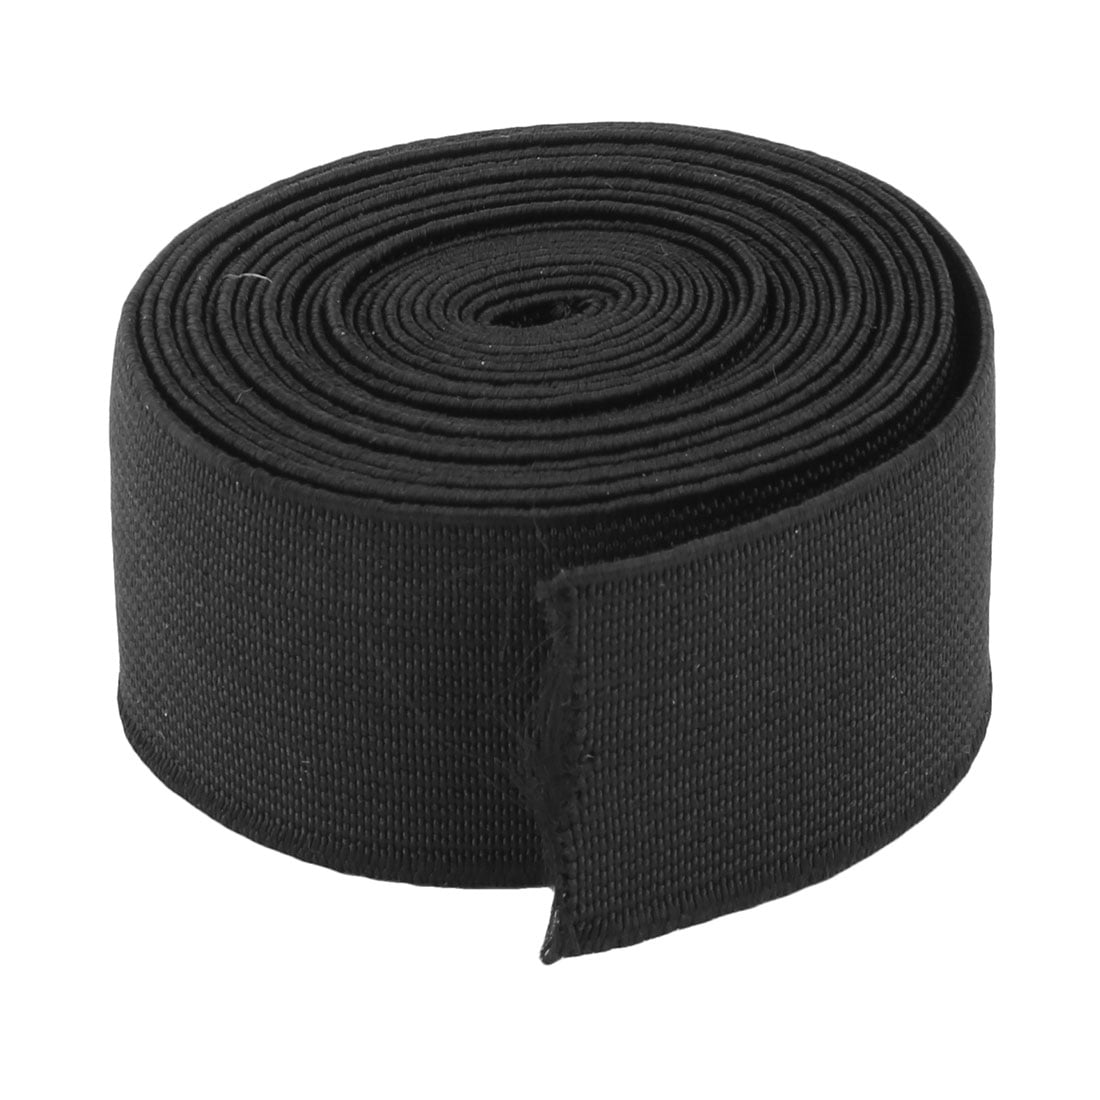 Trimming Shop 7mm Elastic Band Stretchable Smooth Finish Elastic Cord  Thread Sewing - Black, 250mtr